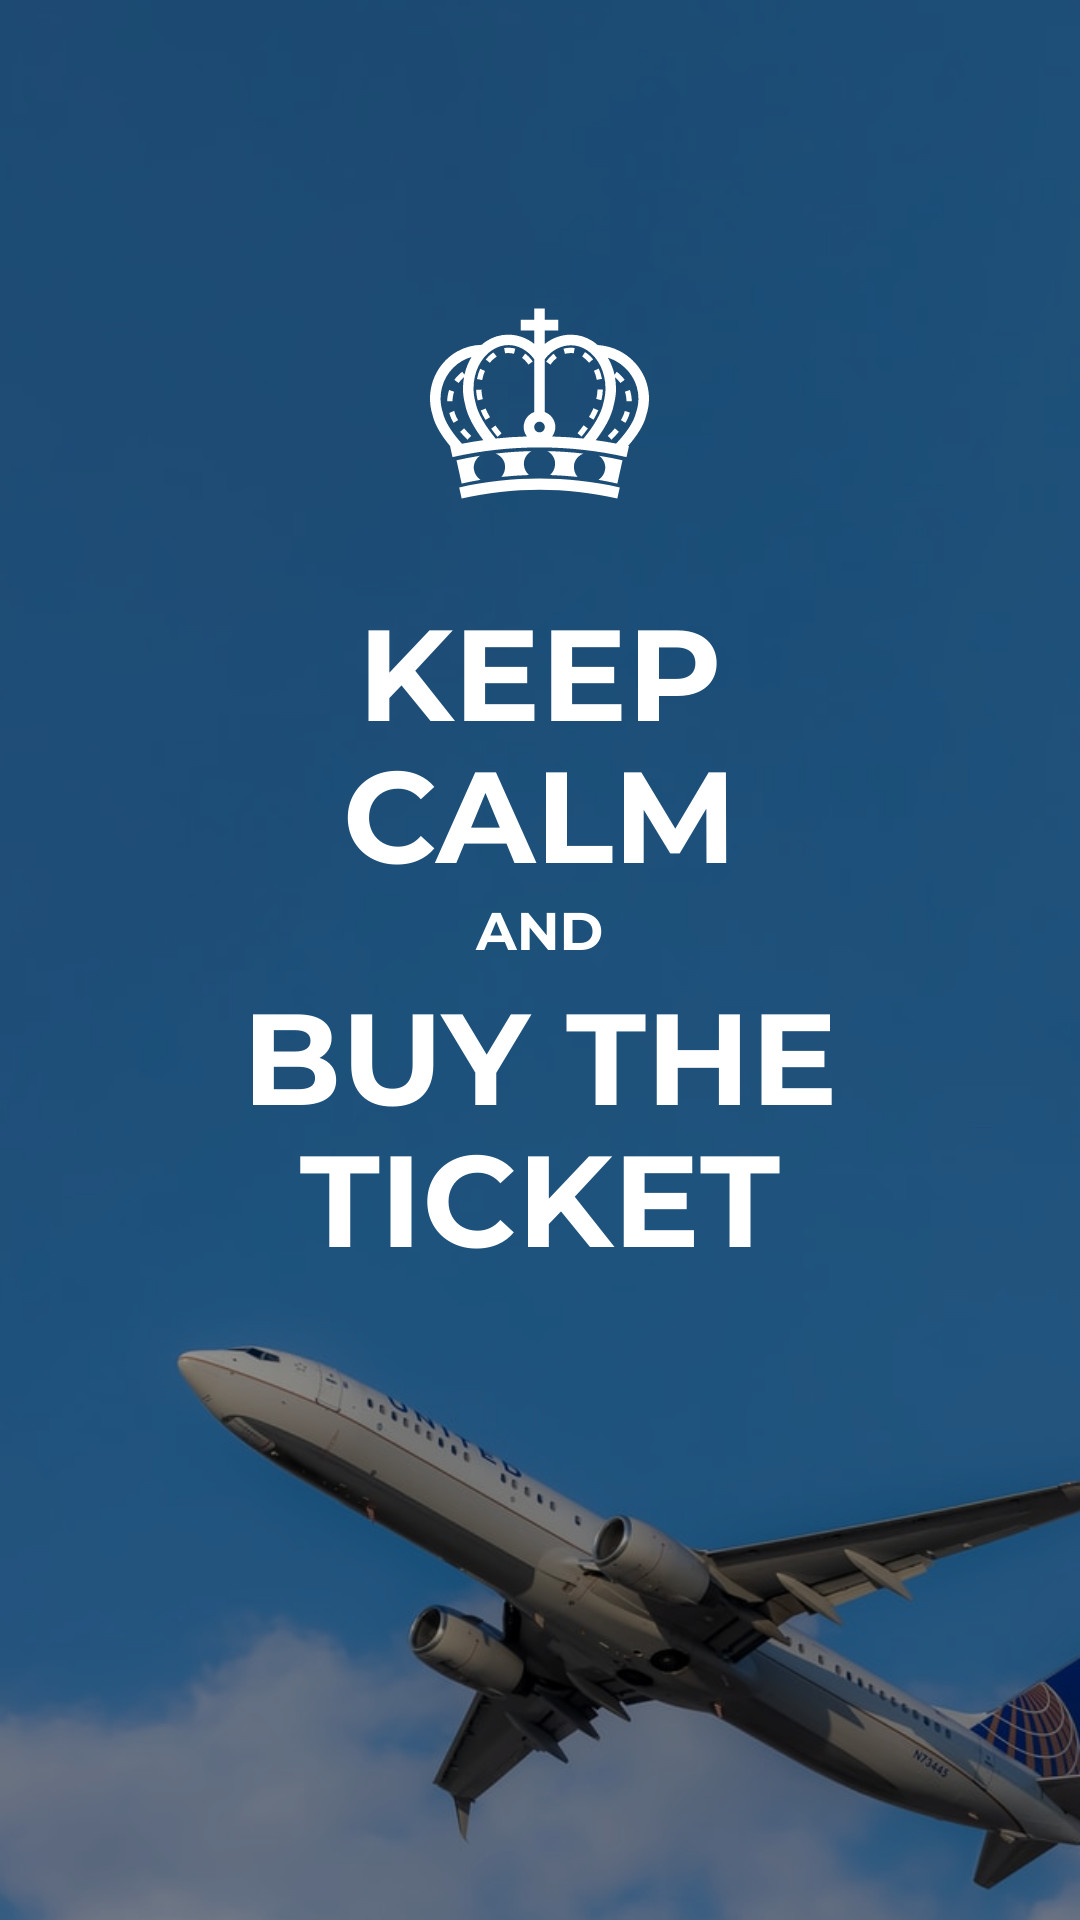 Keep Calm and Buy the Ticket Facebook Sponsored Message 1200x628